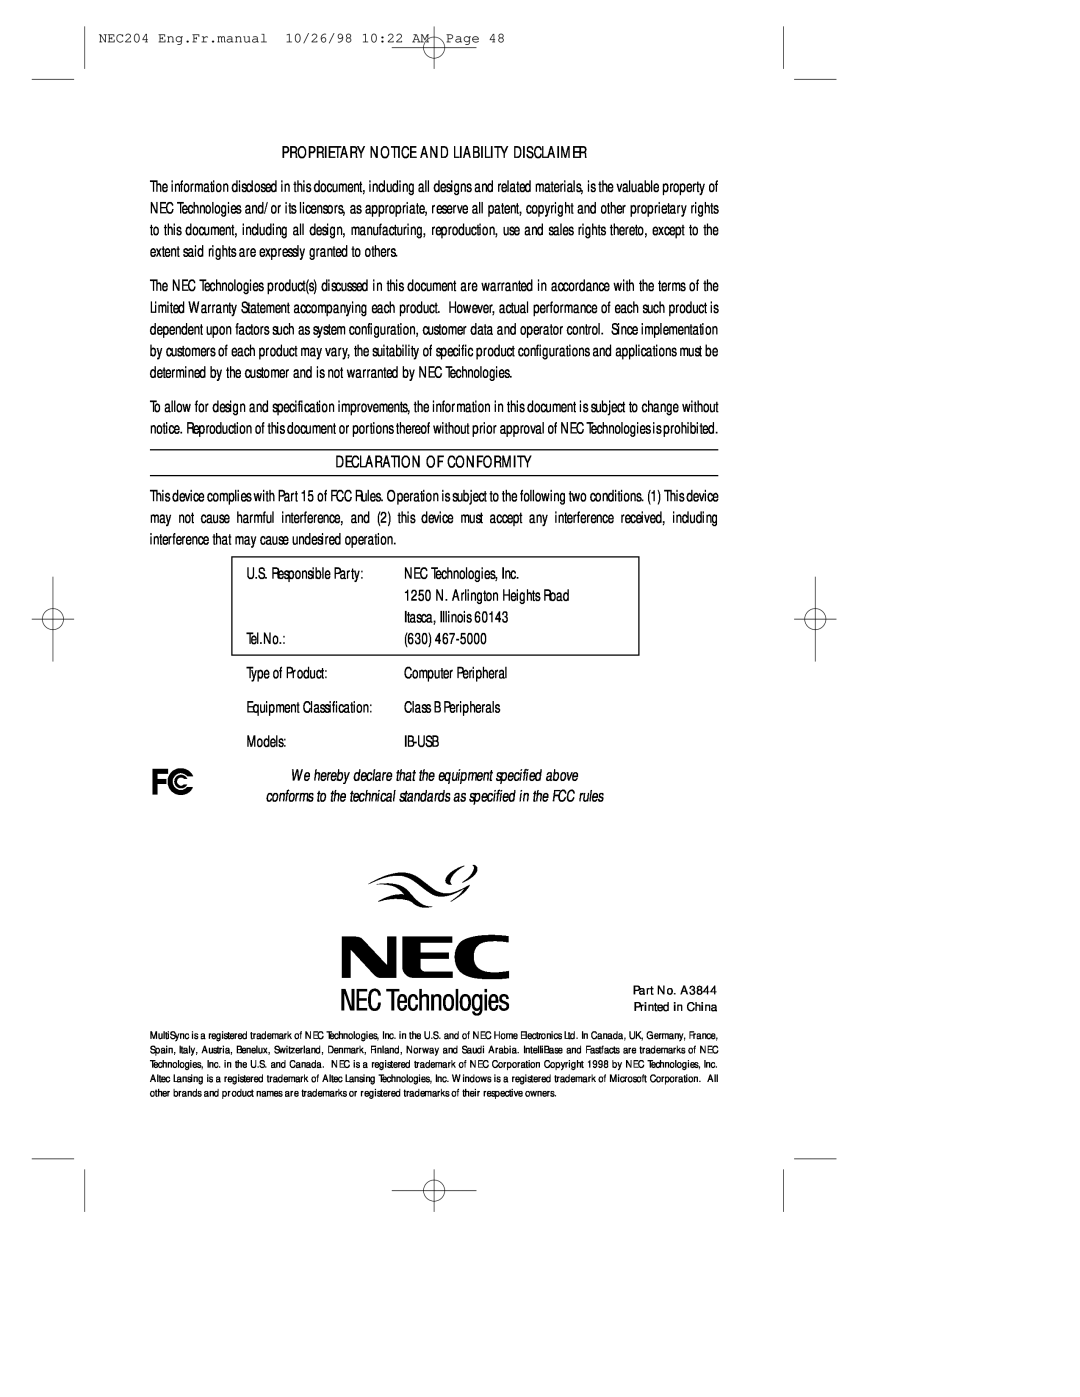 NEC IB-USB, A3844 user manual Proprietary Notice And Liability Disclaimer, Declaration Of Conformity 